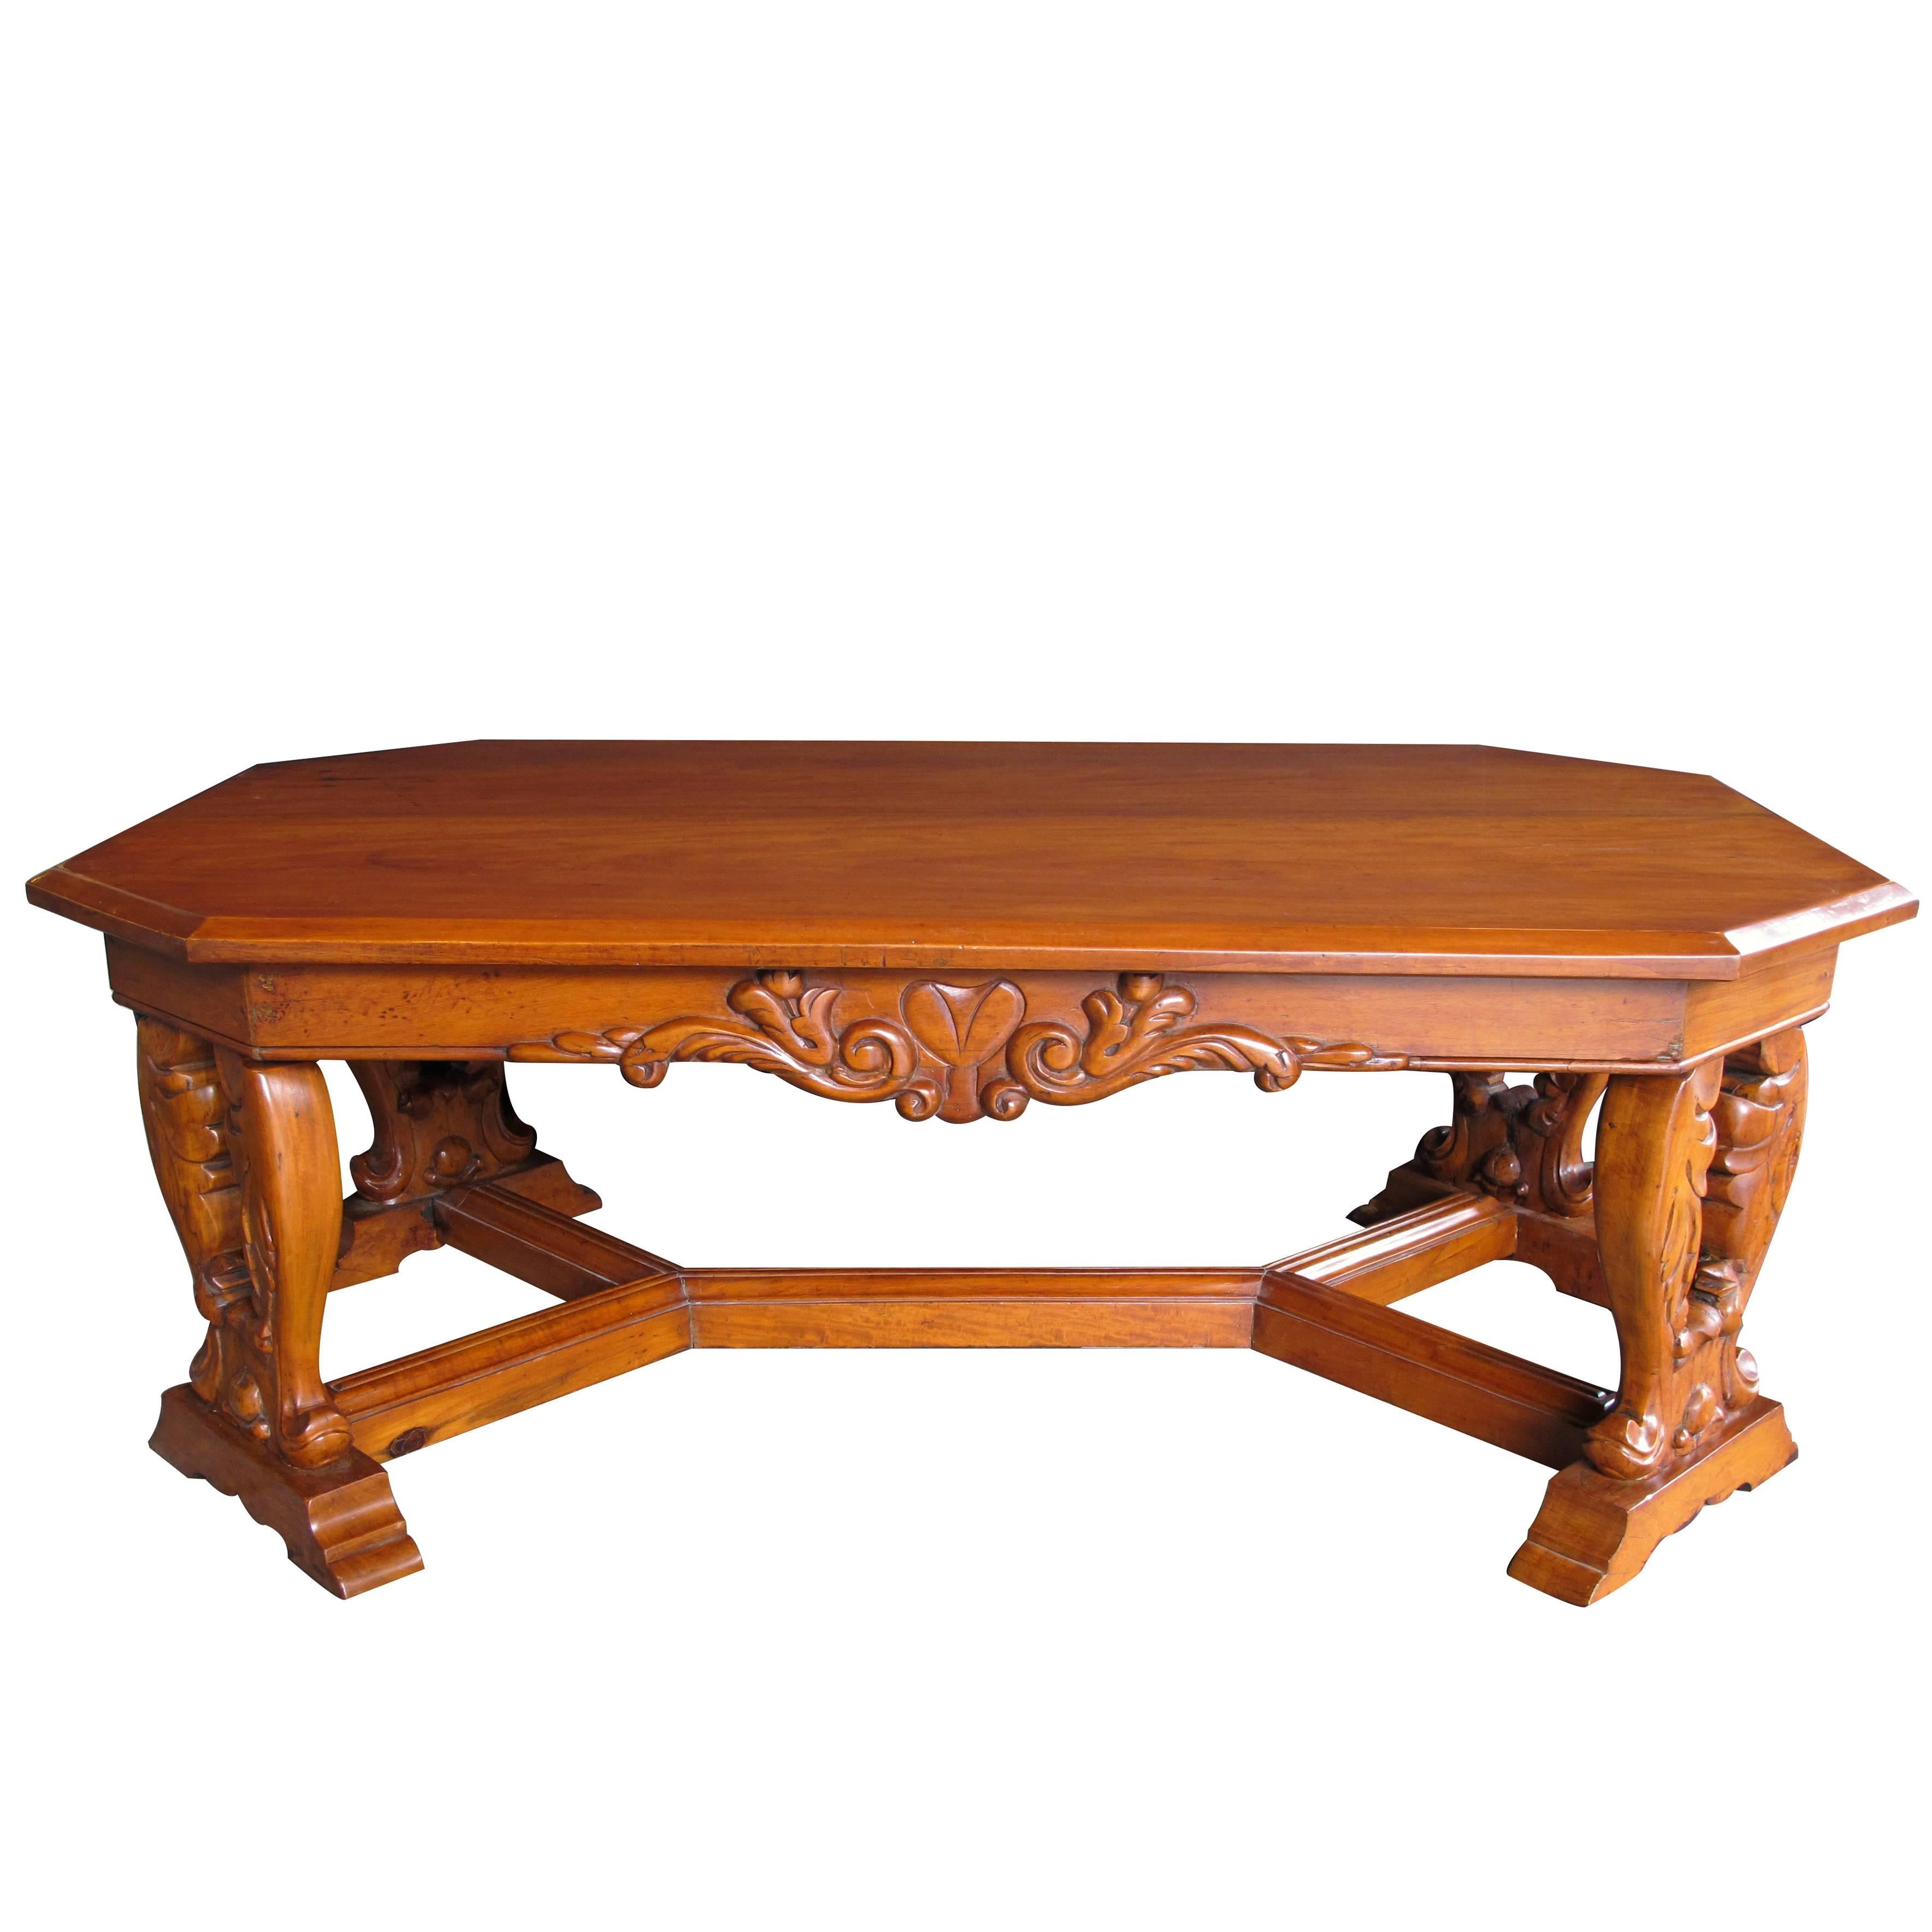 Handsome and Boldly-Carved French Baroque Style Cherrywood Coffee/Cocktail Table